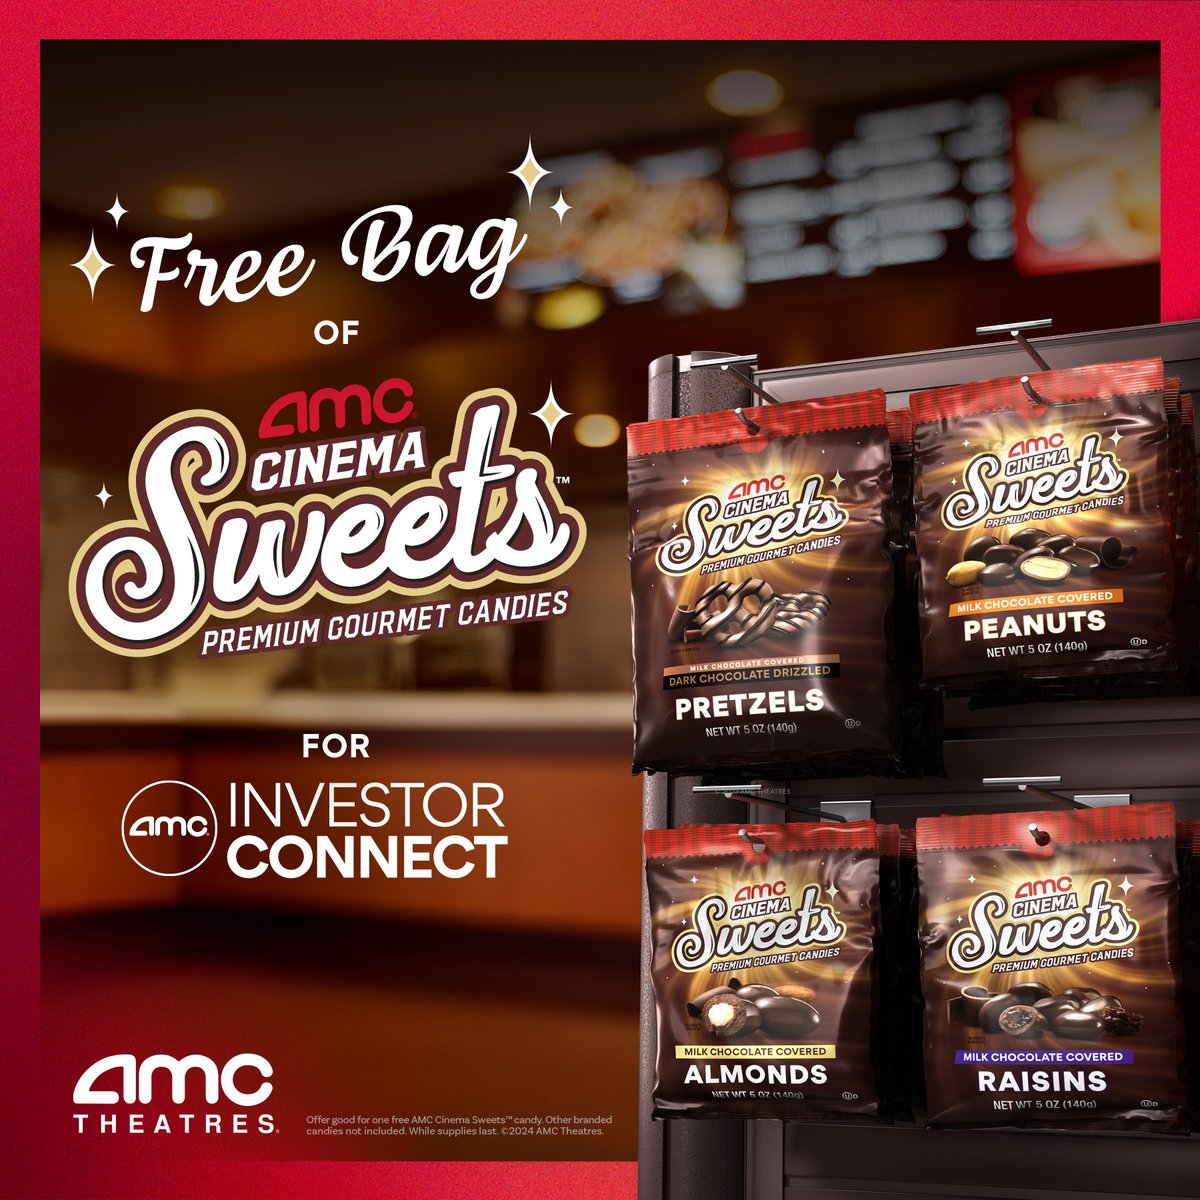 Here is another 'sweet' offer to all AMC moviegoers who also are members of AMC Investor Connect (including those who enroll by April 30). It is free for our shareholders to join: amctheatres.com/stockholders